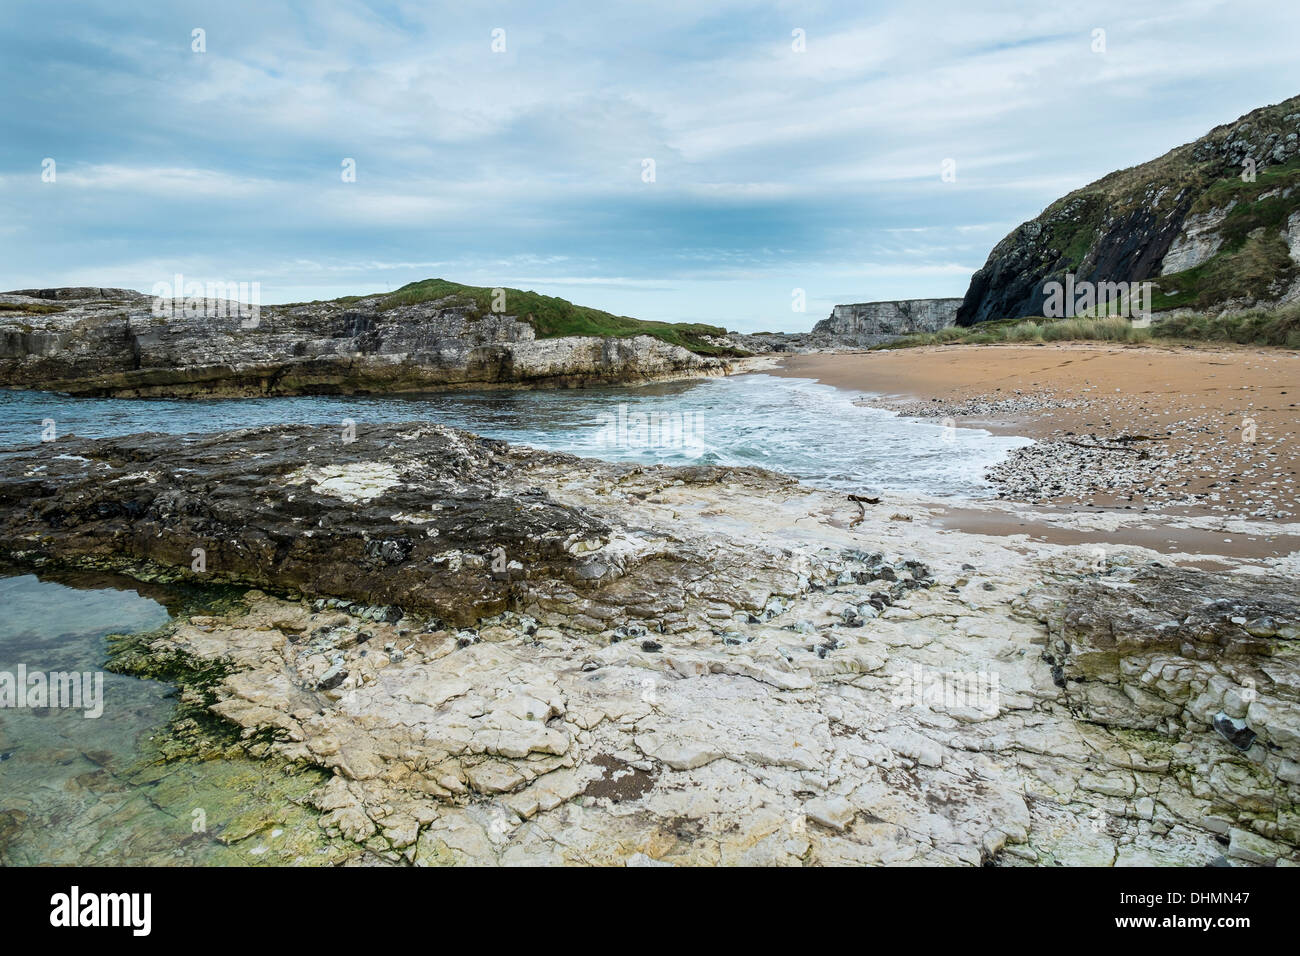 Basalt and Limestone outcrops on a beach near Ballintoy, Co Antrim, Northern Ireland.  A blend of subtle shades. Stock Photo